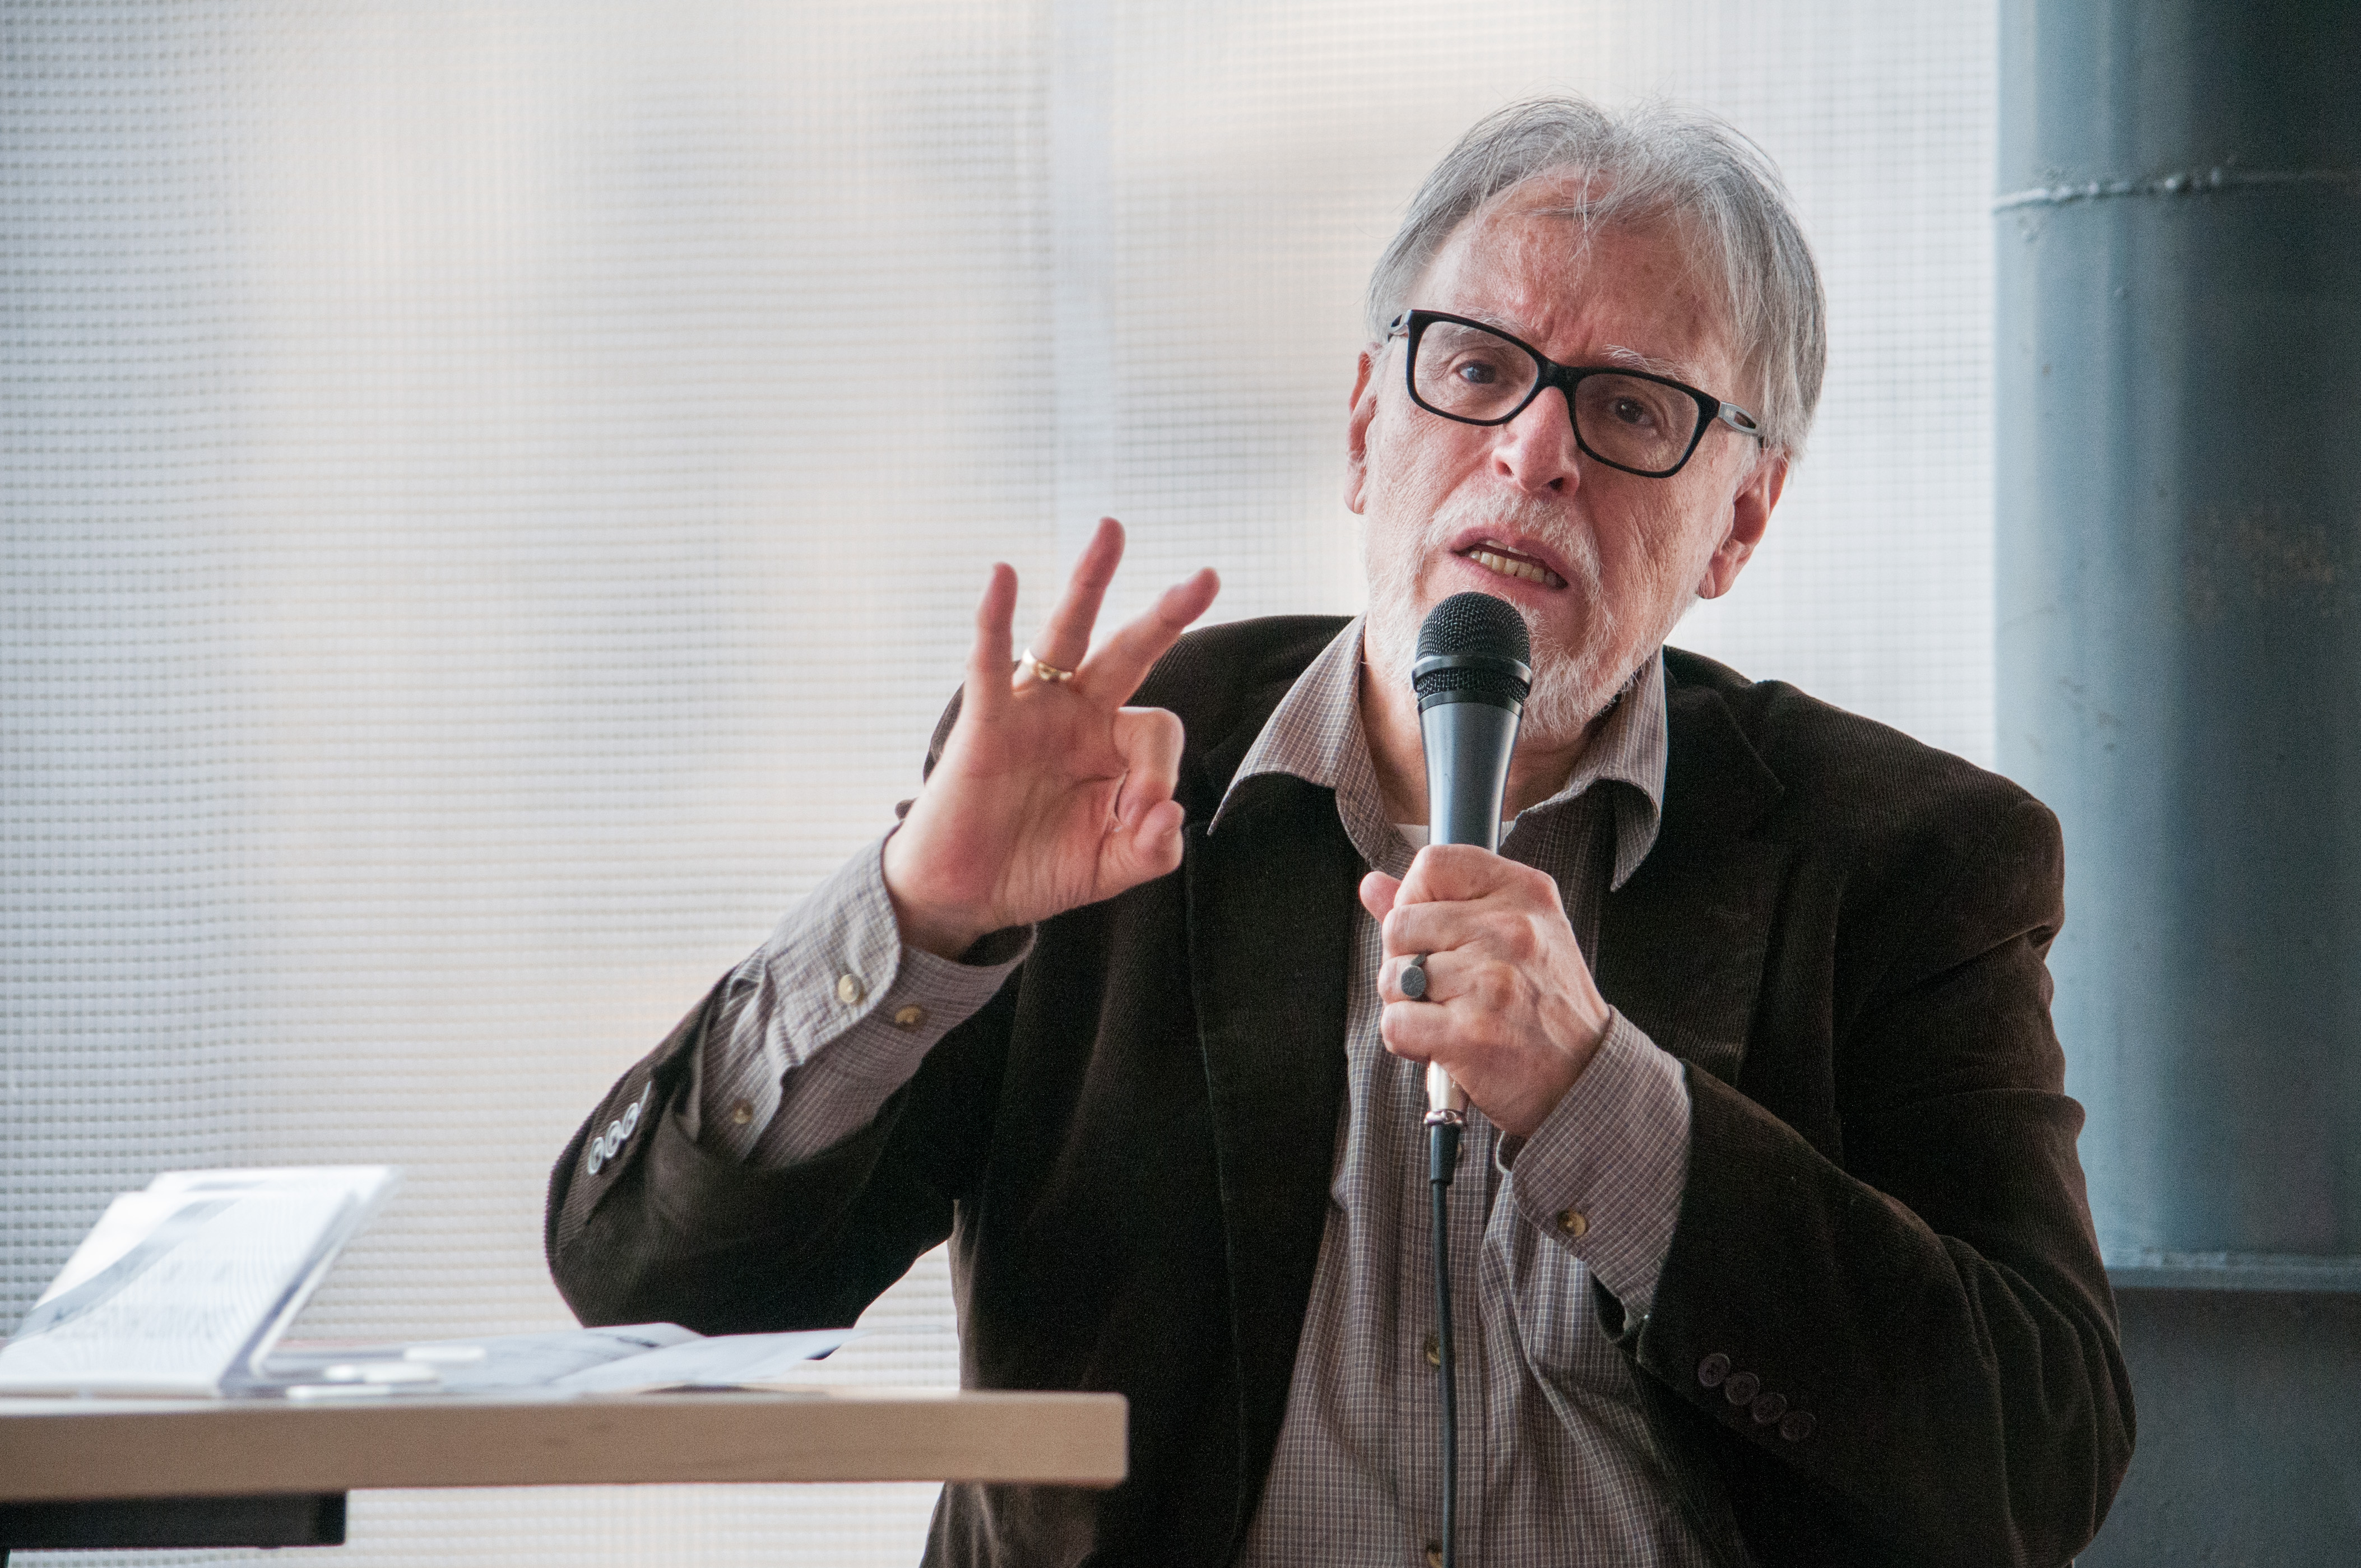 The poet David Huerta died at the age of 72 (PHOTO: CUARTOSCURO)